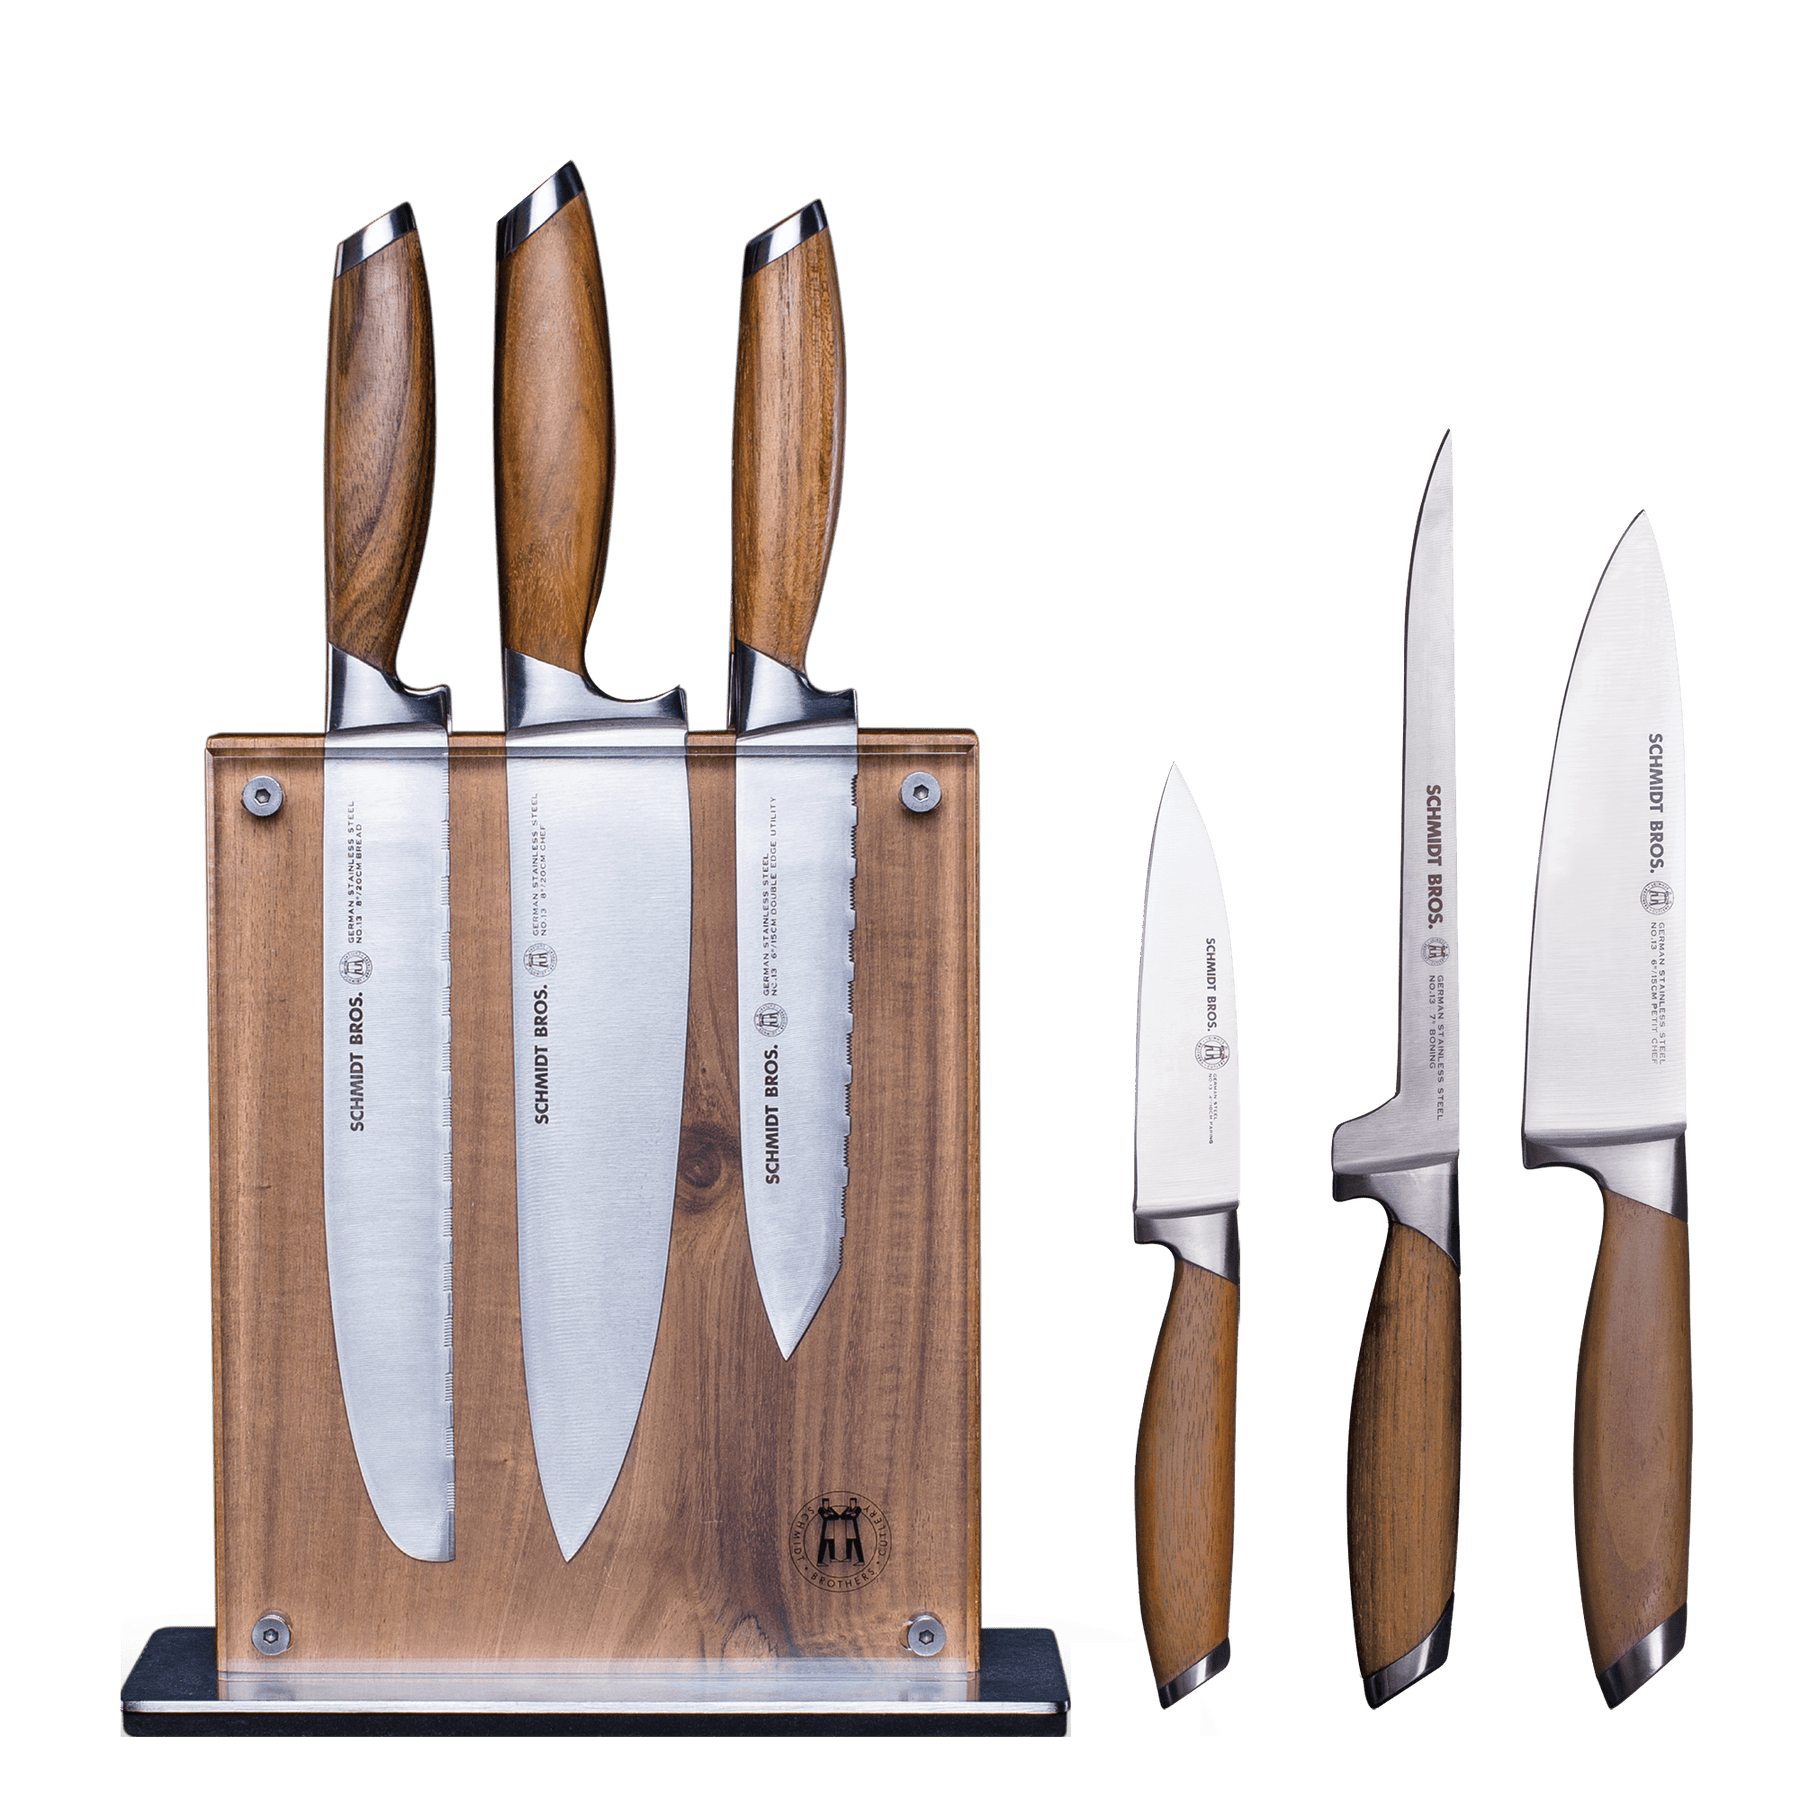 Schmidt Brothers BBQ Ash 4-PIece Grill Tool Set, Stainless Steel